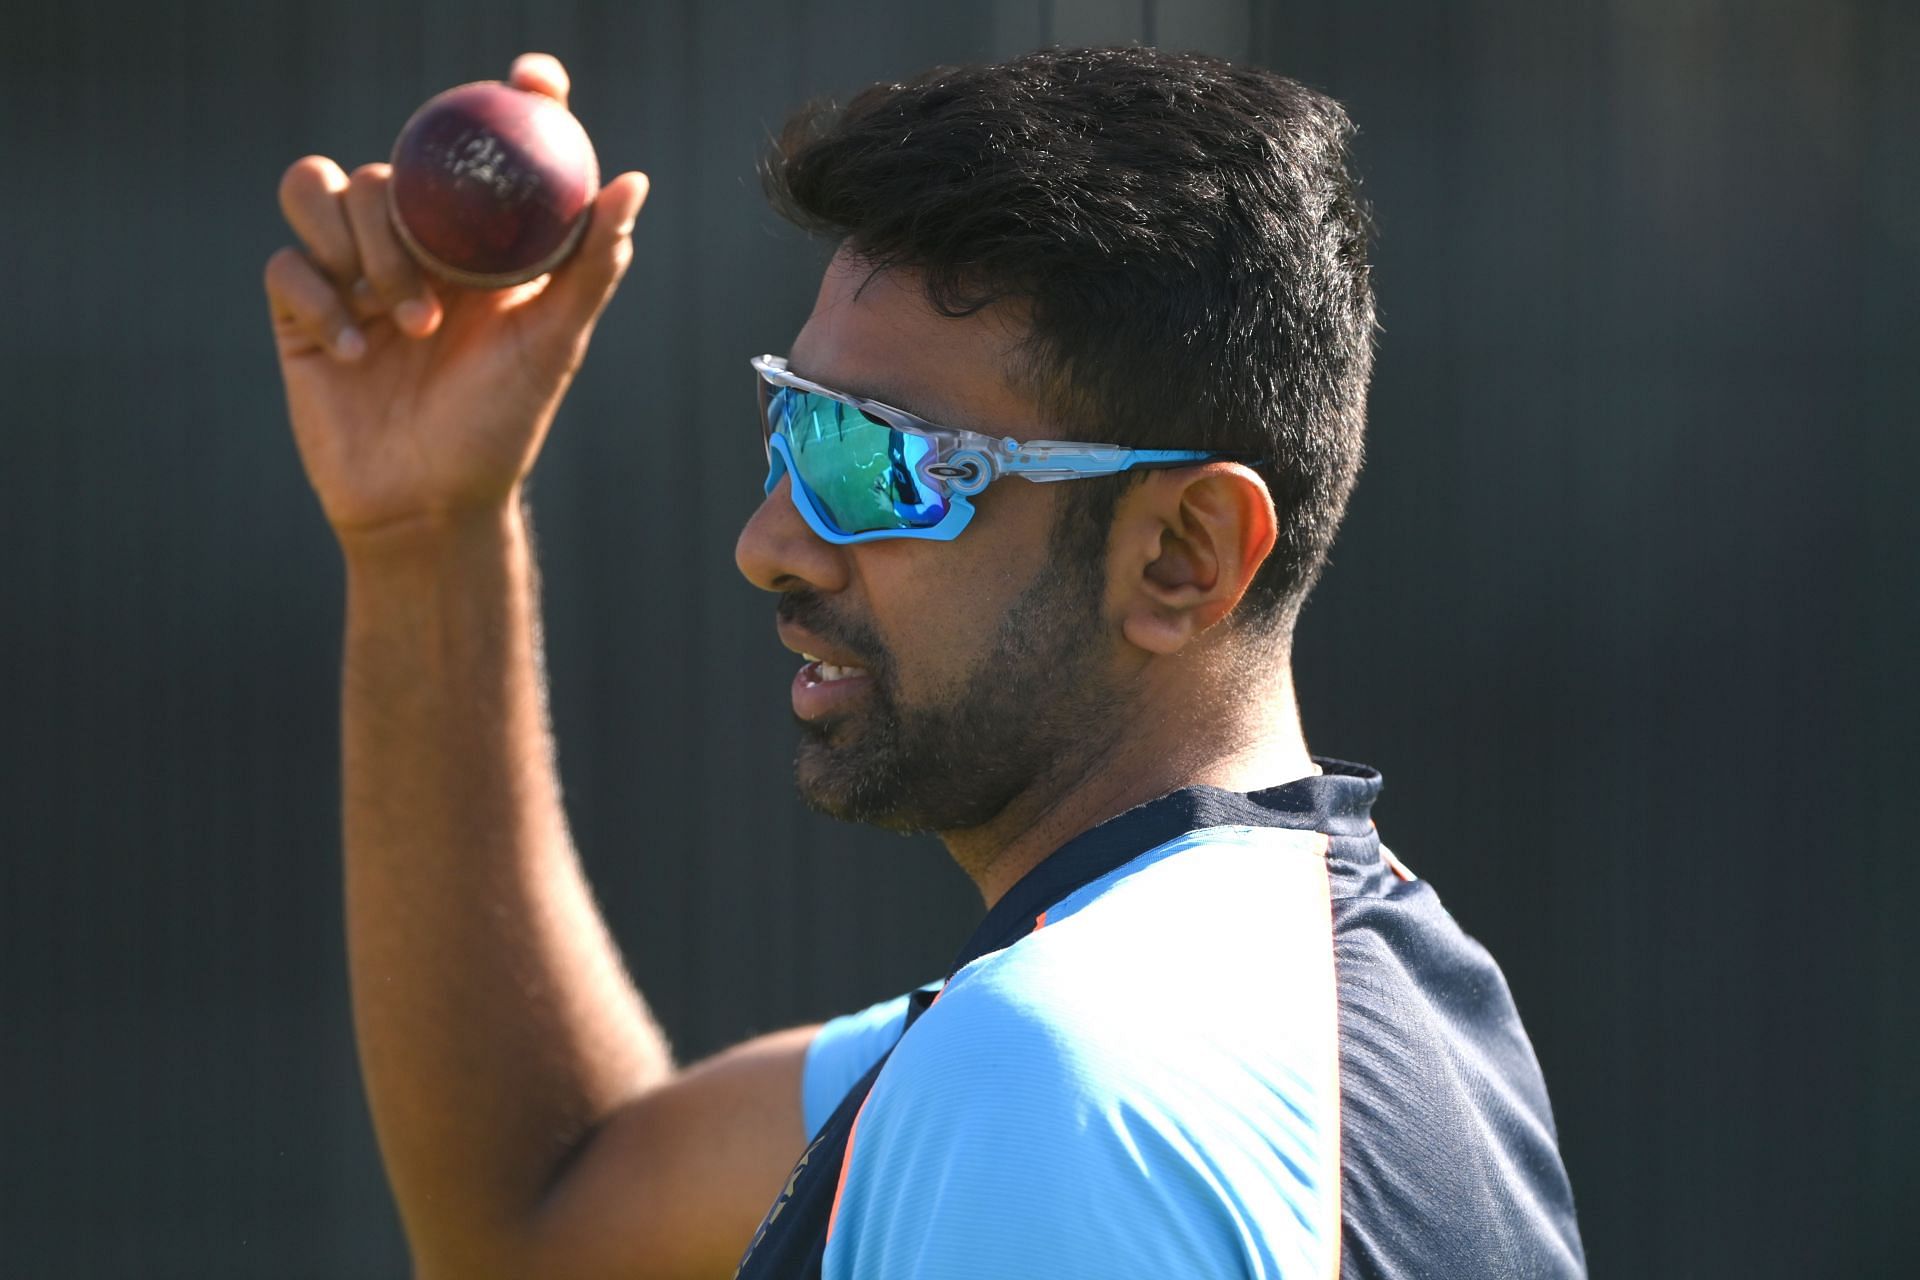 Ravichandran Ashwin is one of the best spinners of all time